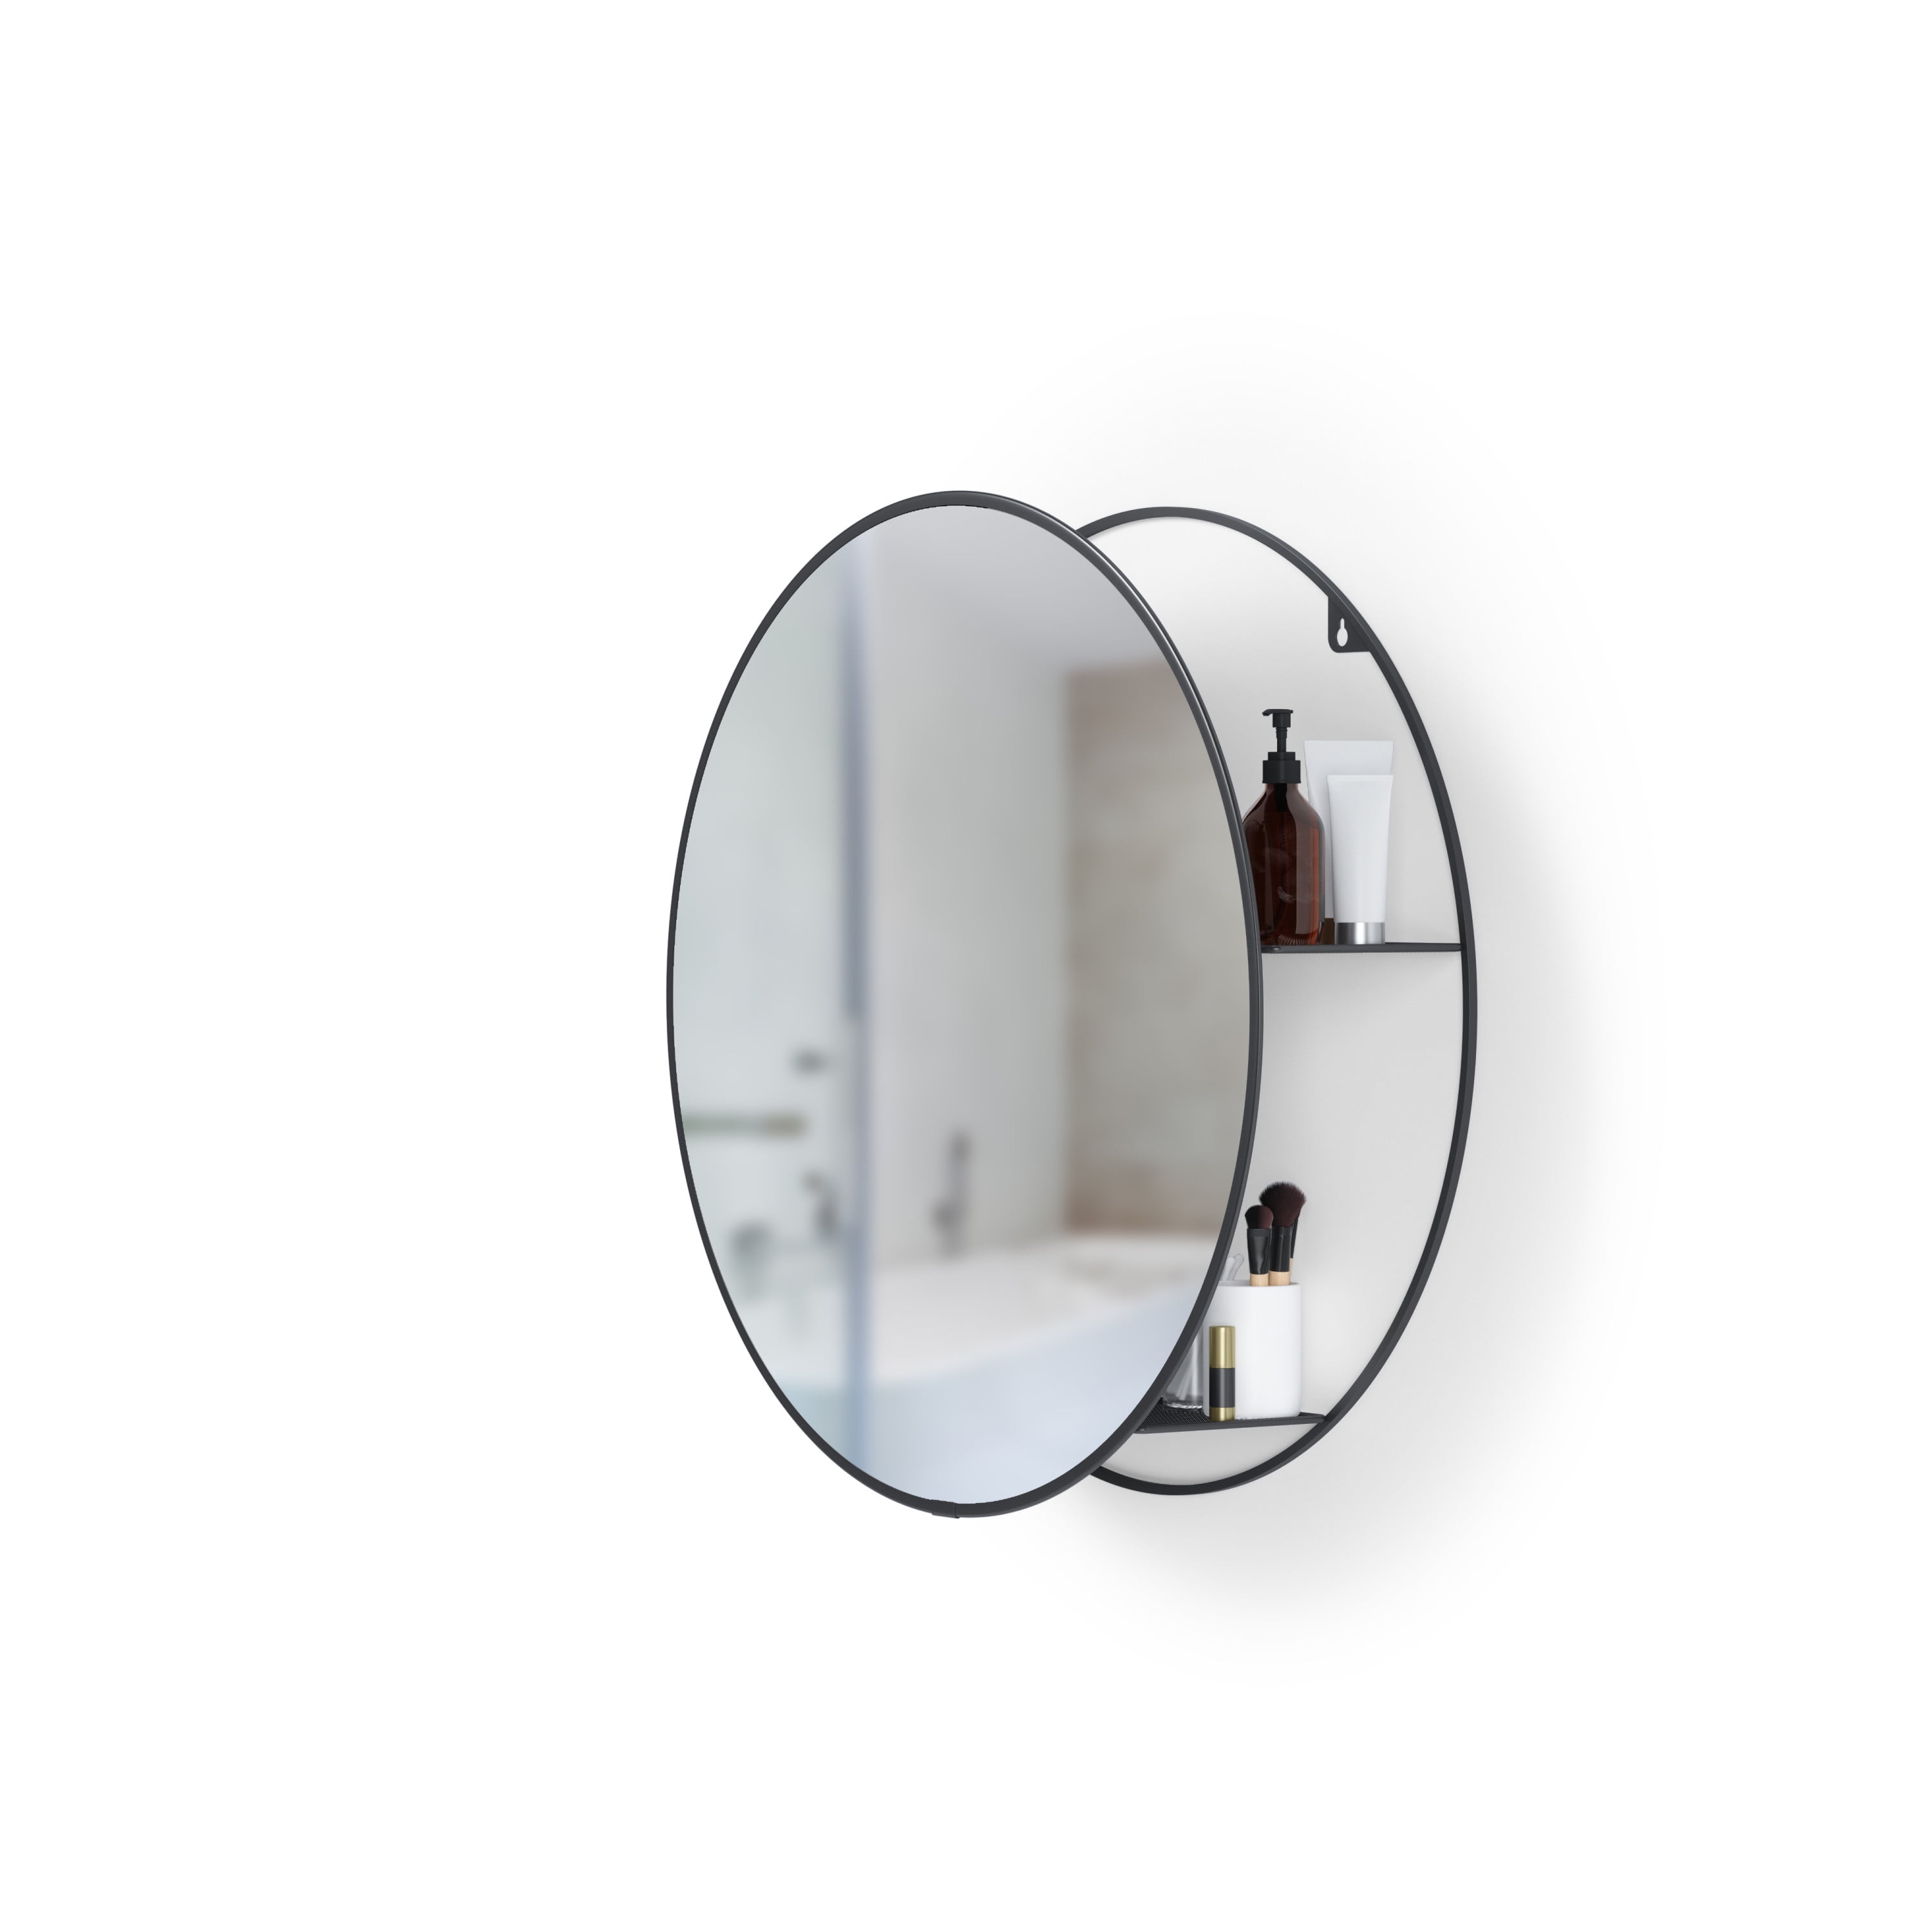 30" HP30 Mirror and Picture Hanger 762mm 